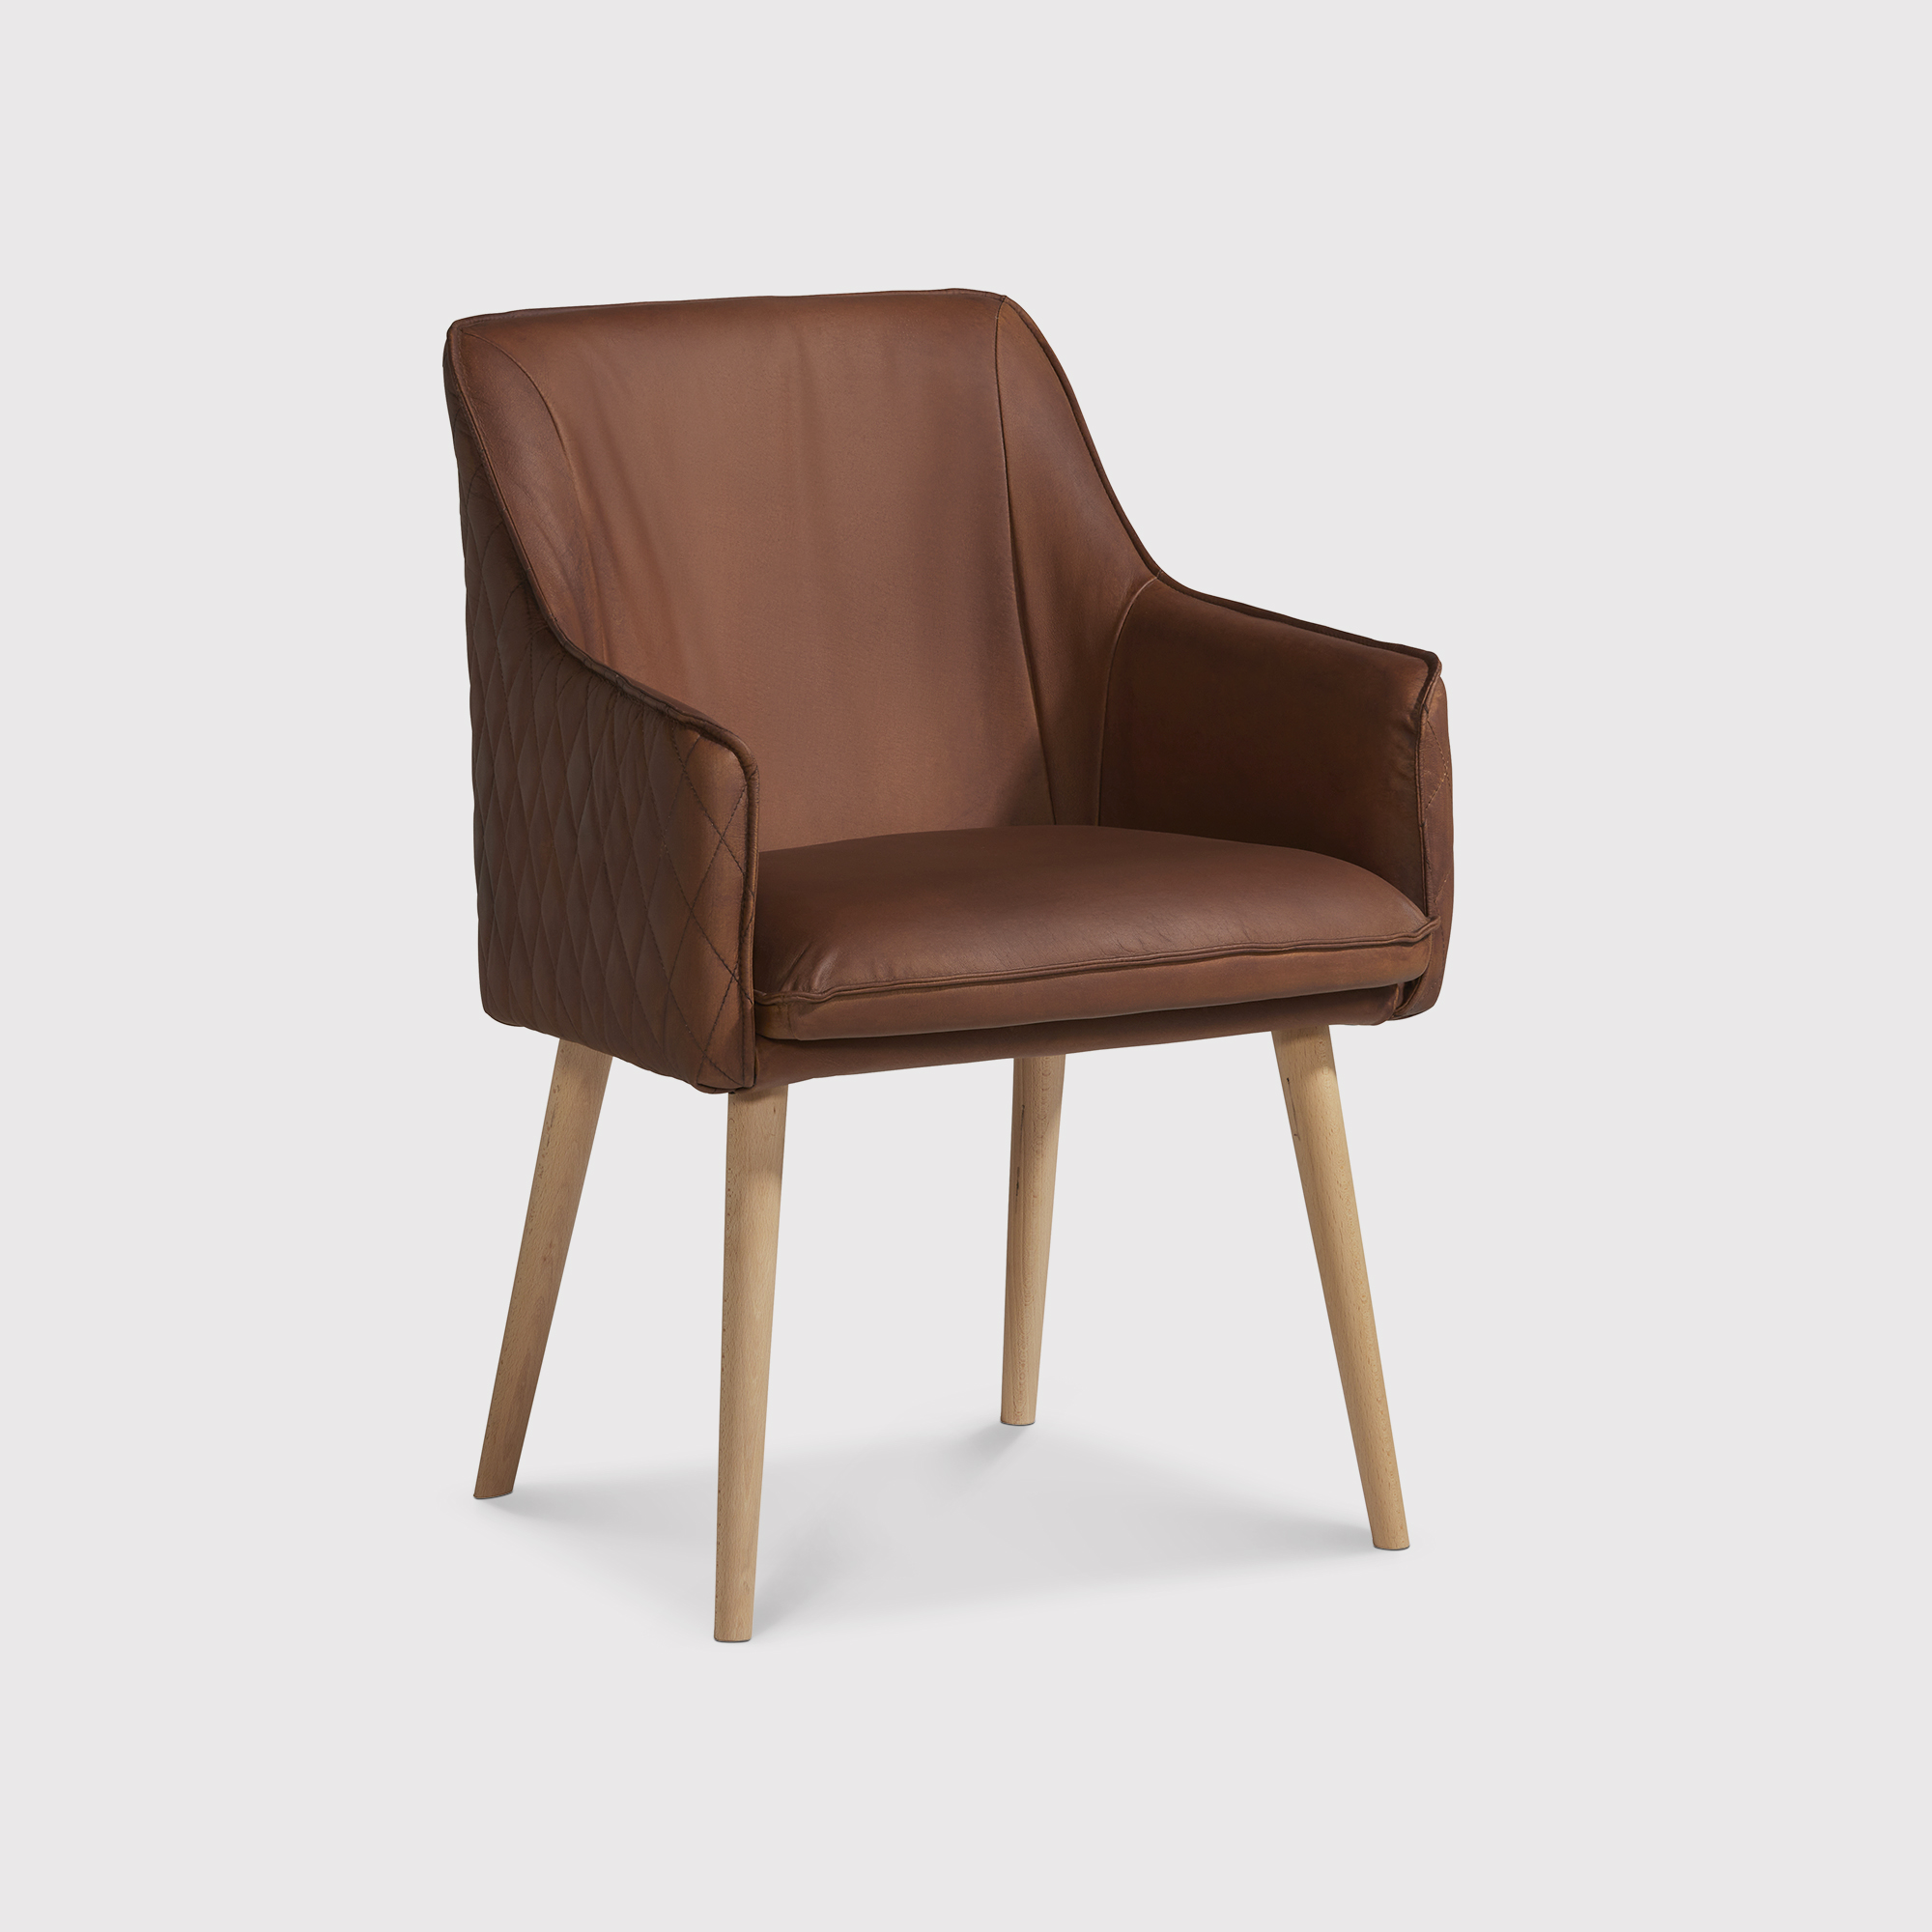 Pure Furniture Antares Dining Chair, Brown | Barker & Stonehouse